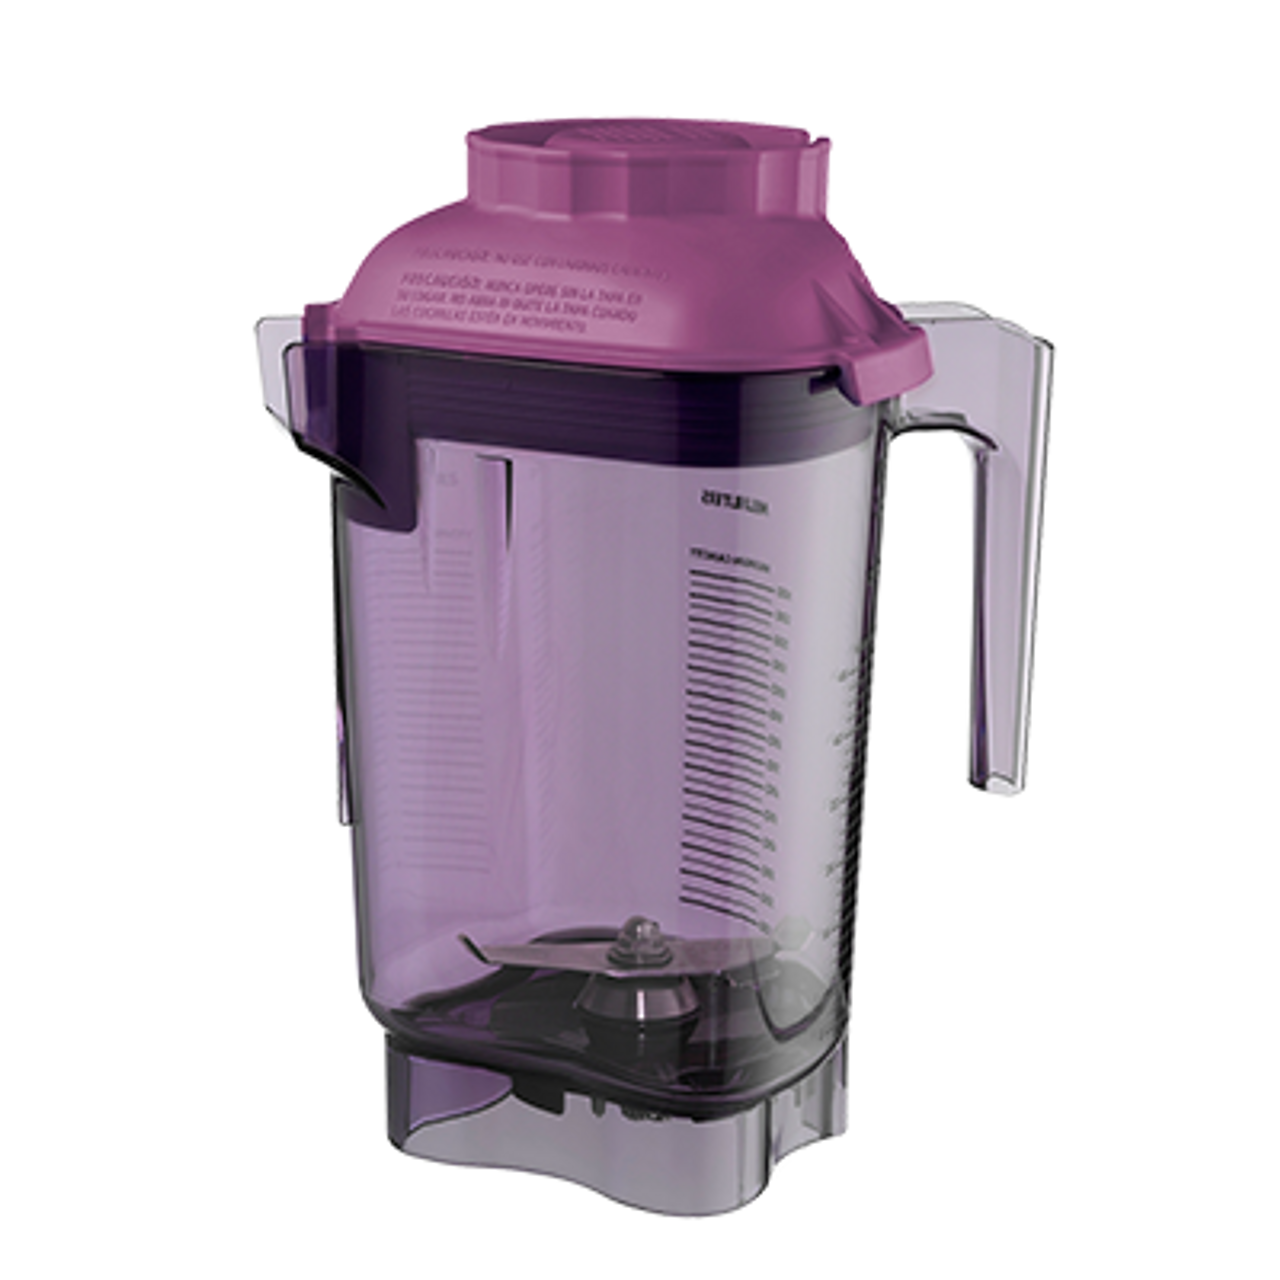 Vitamix 58987 Color Coded 32 oz. Advance Container with Blade Assembly, Purple - Best Price Guarantee!